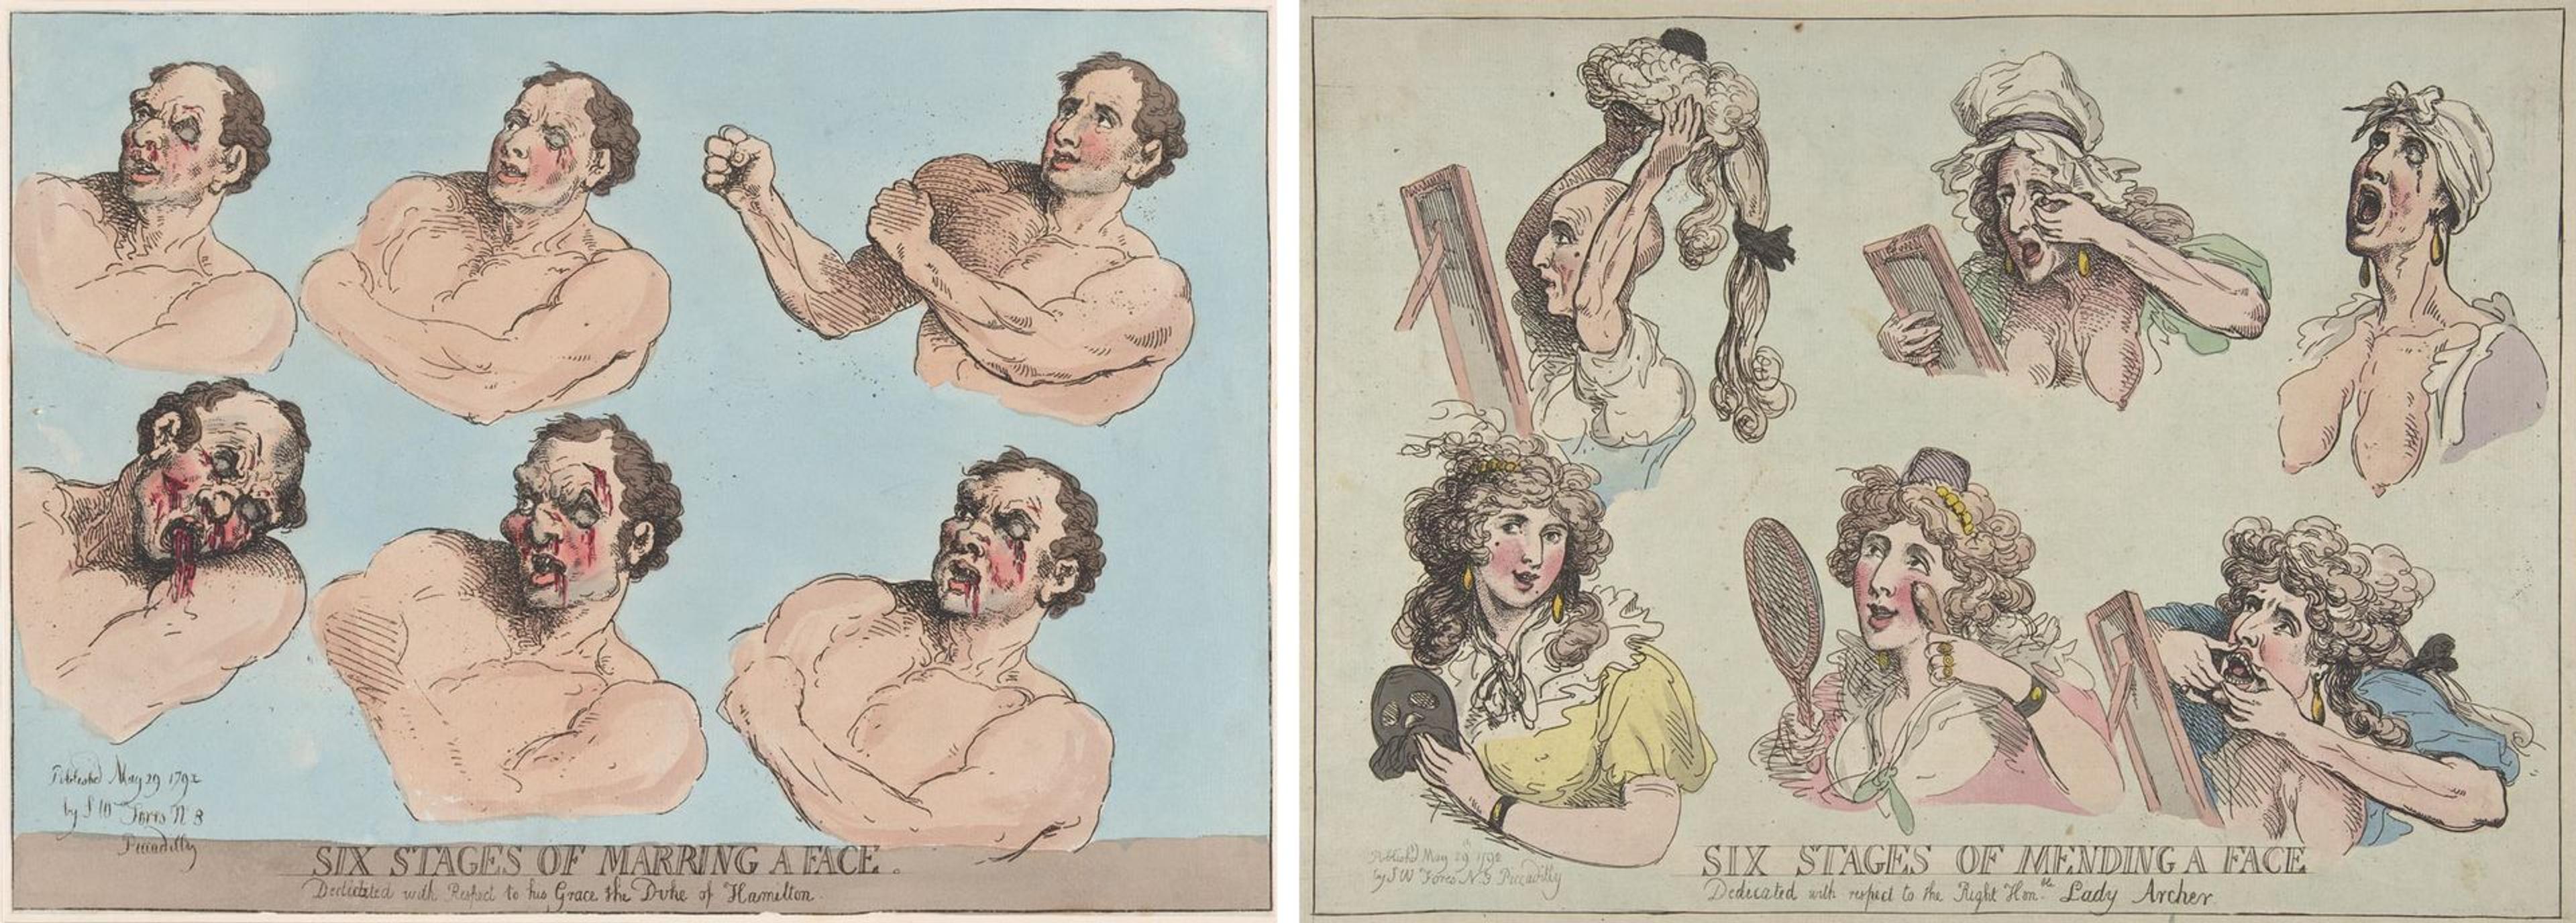 Two Thomas Rowlandson etchings from 1792 depicting various facial injuries (left) and how to mend them (right)